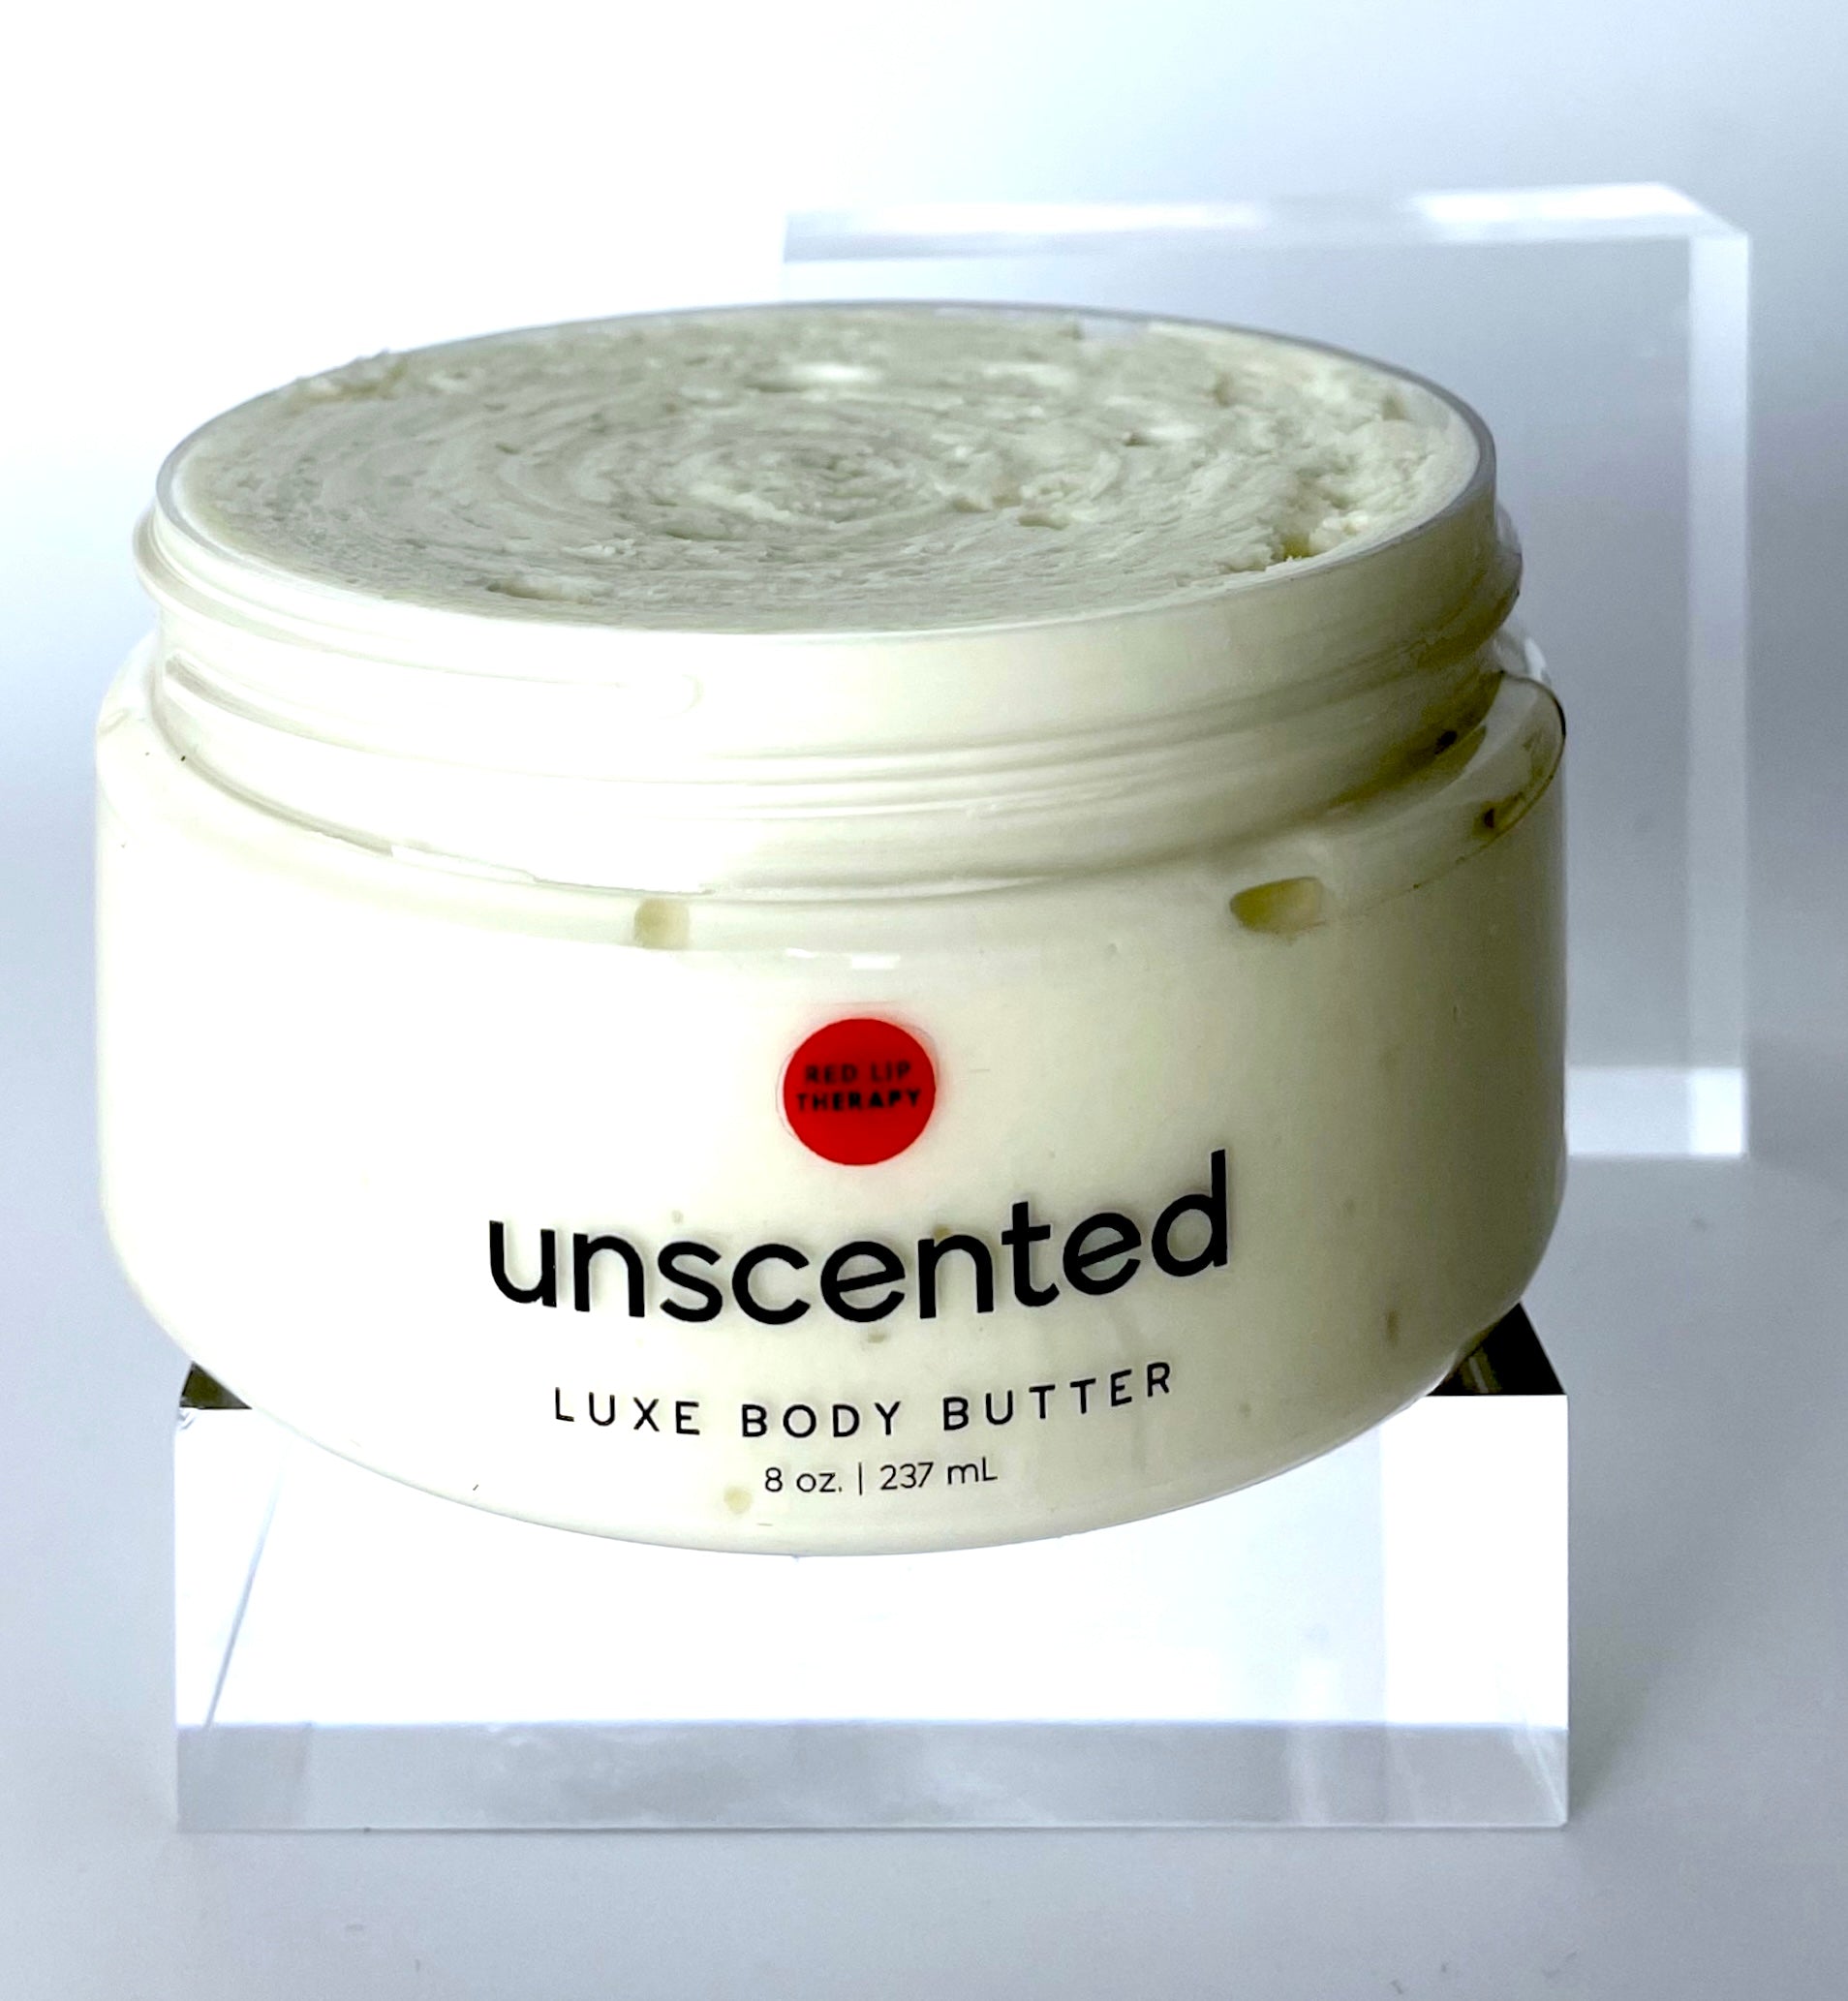 Unscented Luxe Body Butter